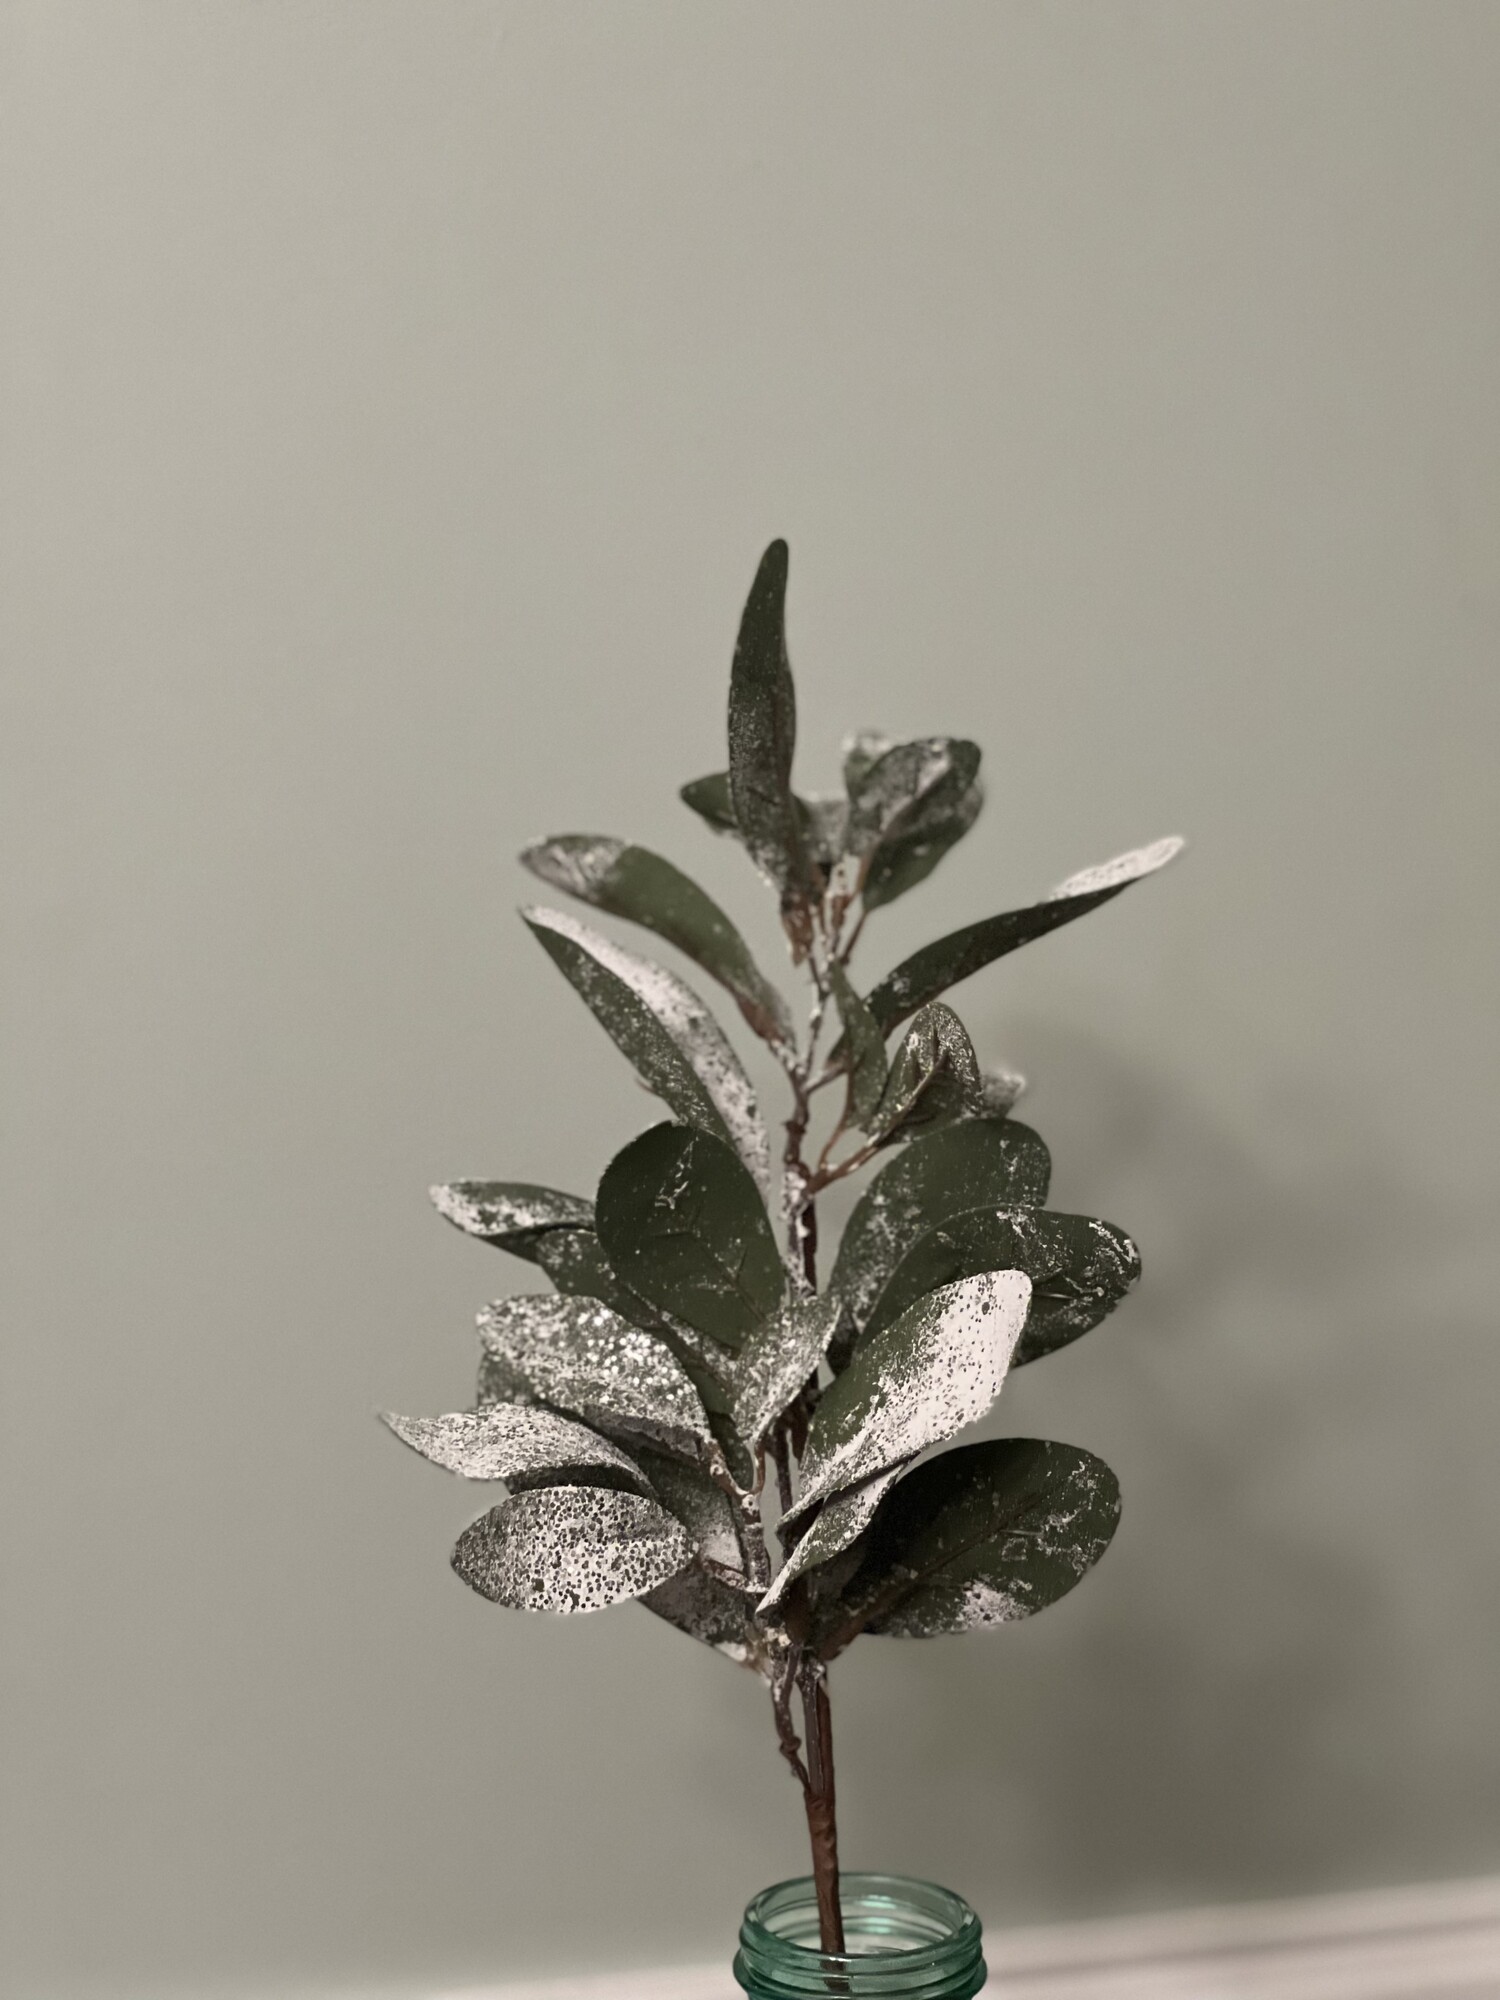 The Frosted Lambs Ear stem is absolutely gorgeous with it snowy and glittered leaves on a brown floral wrapped stem. This stem will be perfect on its own or added to any floral arrangement. Stem measures 18 inches tall